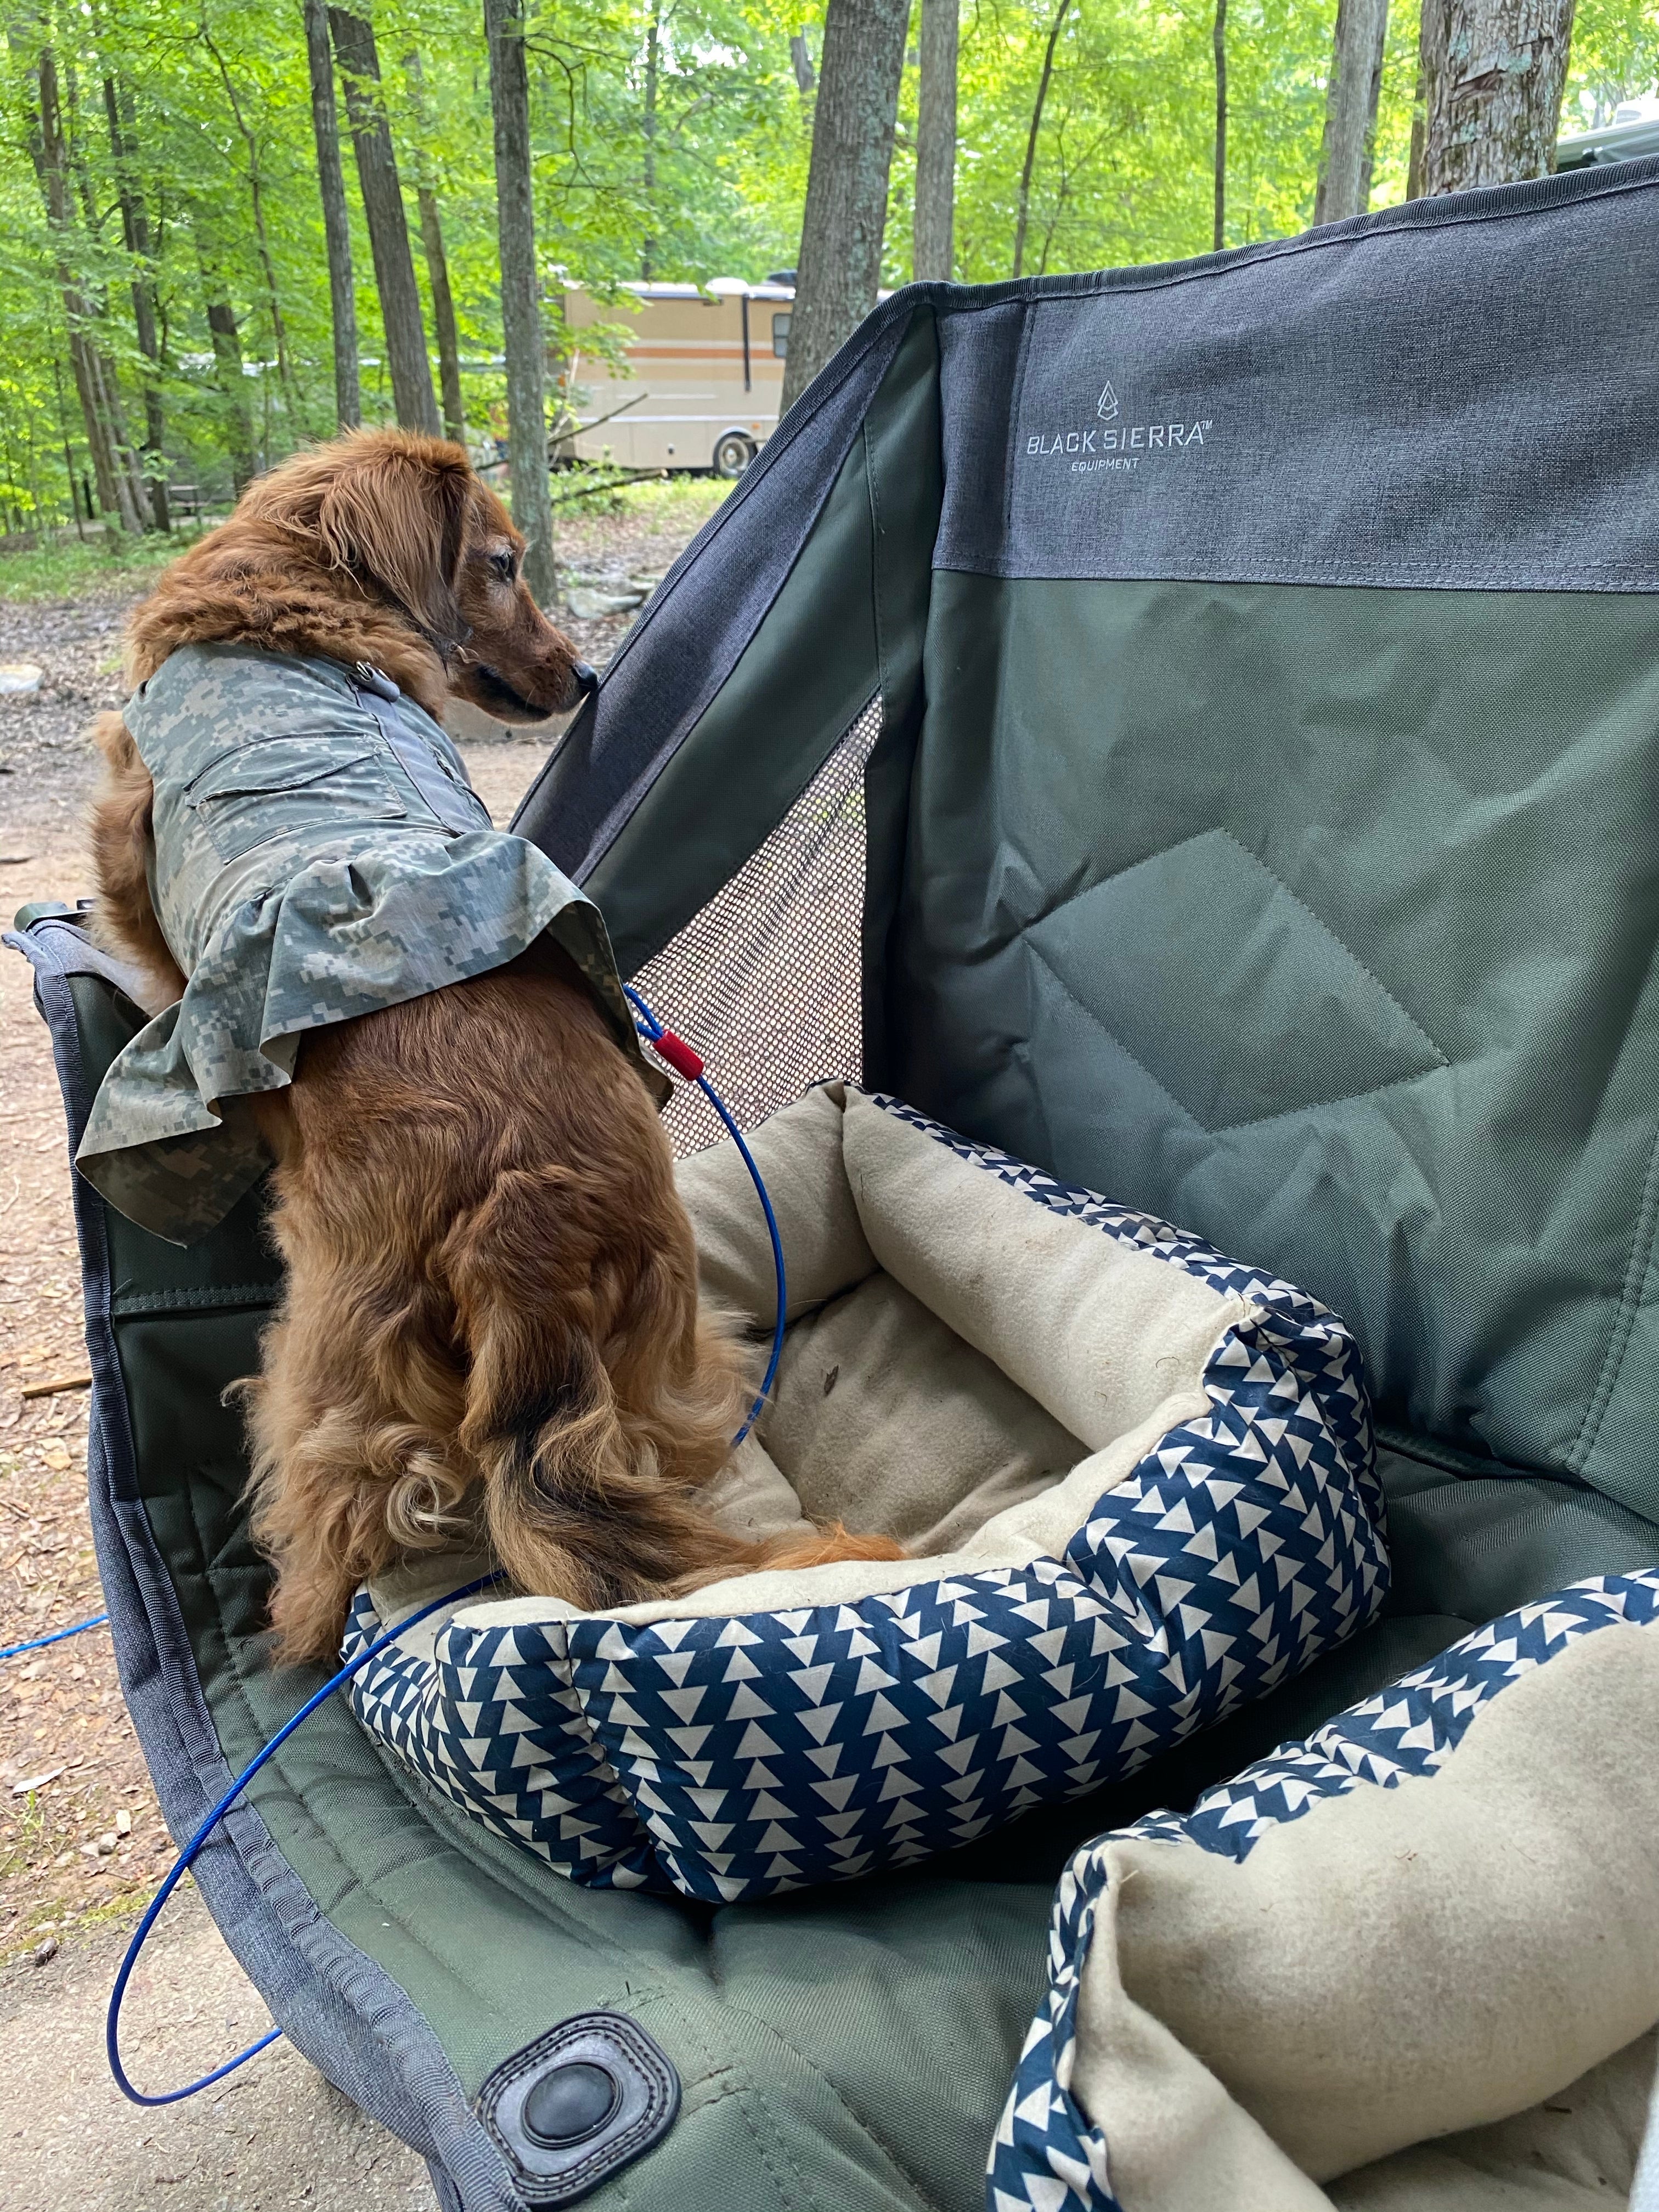 What’s up? Hey can I have some of what you have; even if I shouldn’t cause I am the most cutest camping girl. My name is sassy, but they also call me chicken nugget and gremlin ;)